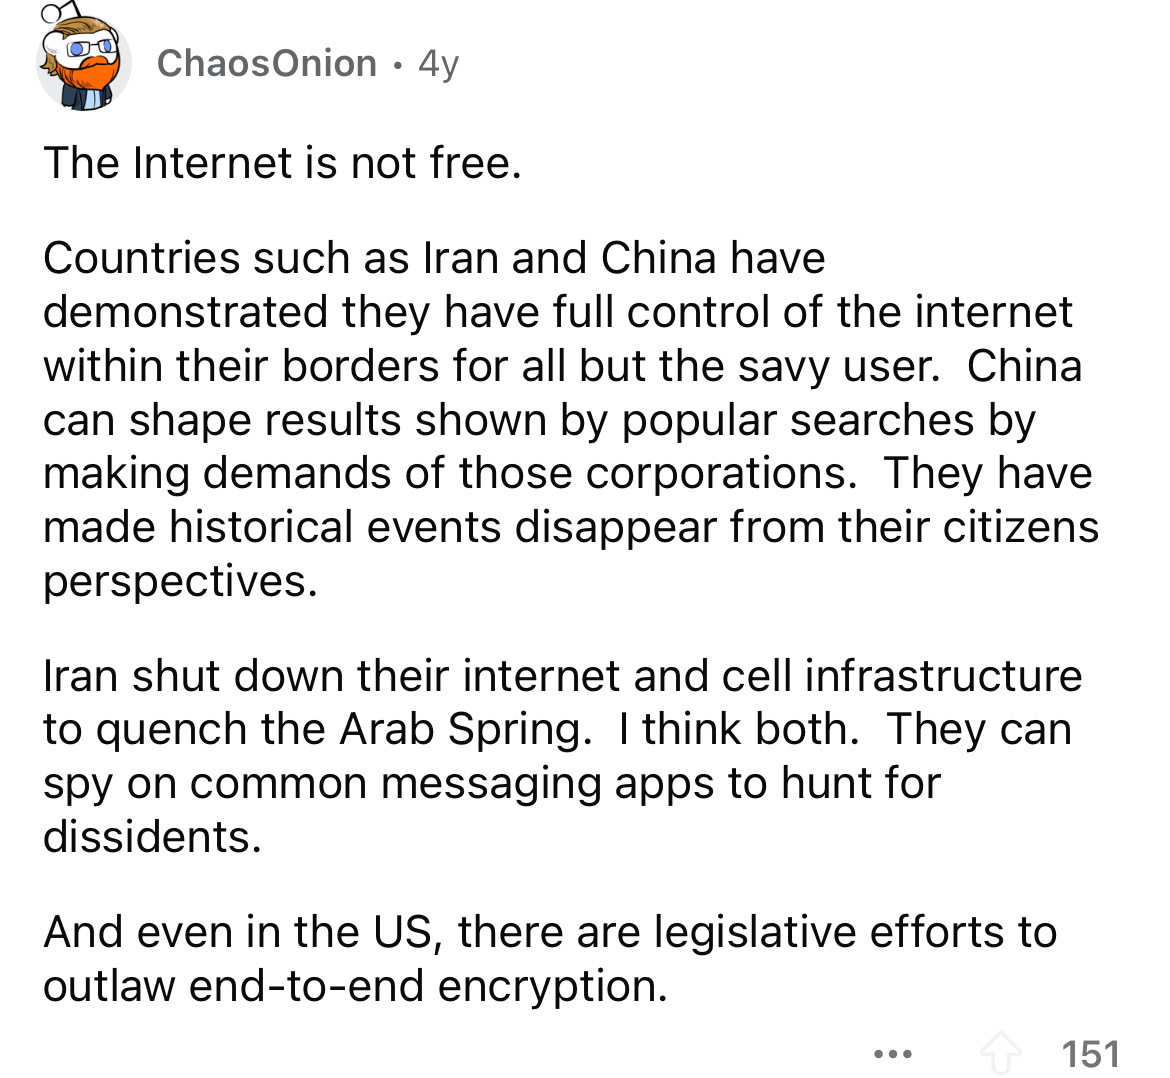 number - ChaosOnion 4y The Internet is not free. Countries such as Iran and China have demonstrated they have full control of the internet within their borders for all but the savy user. China can shape results shown by popular searches by making demands 